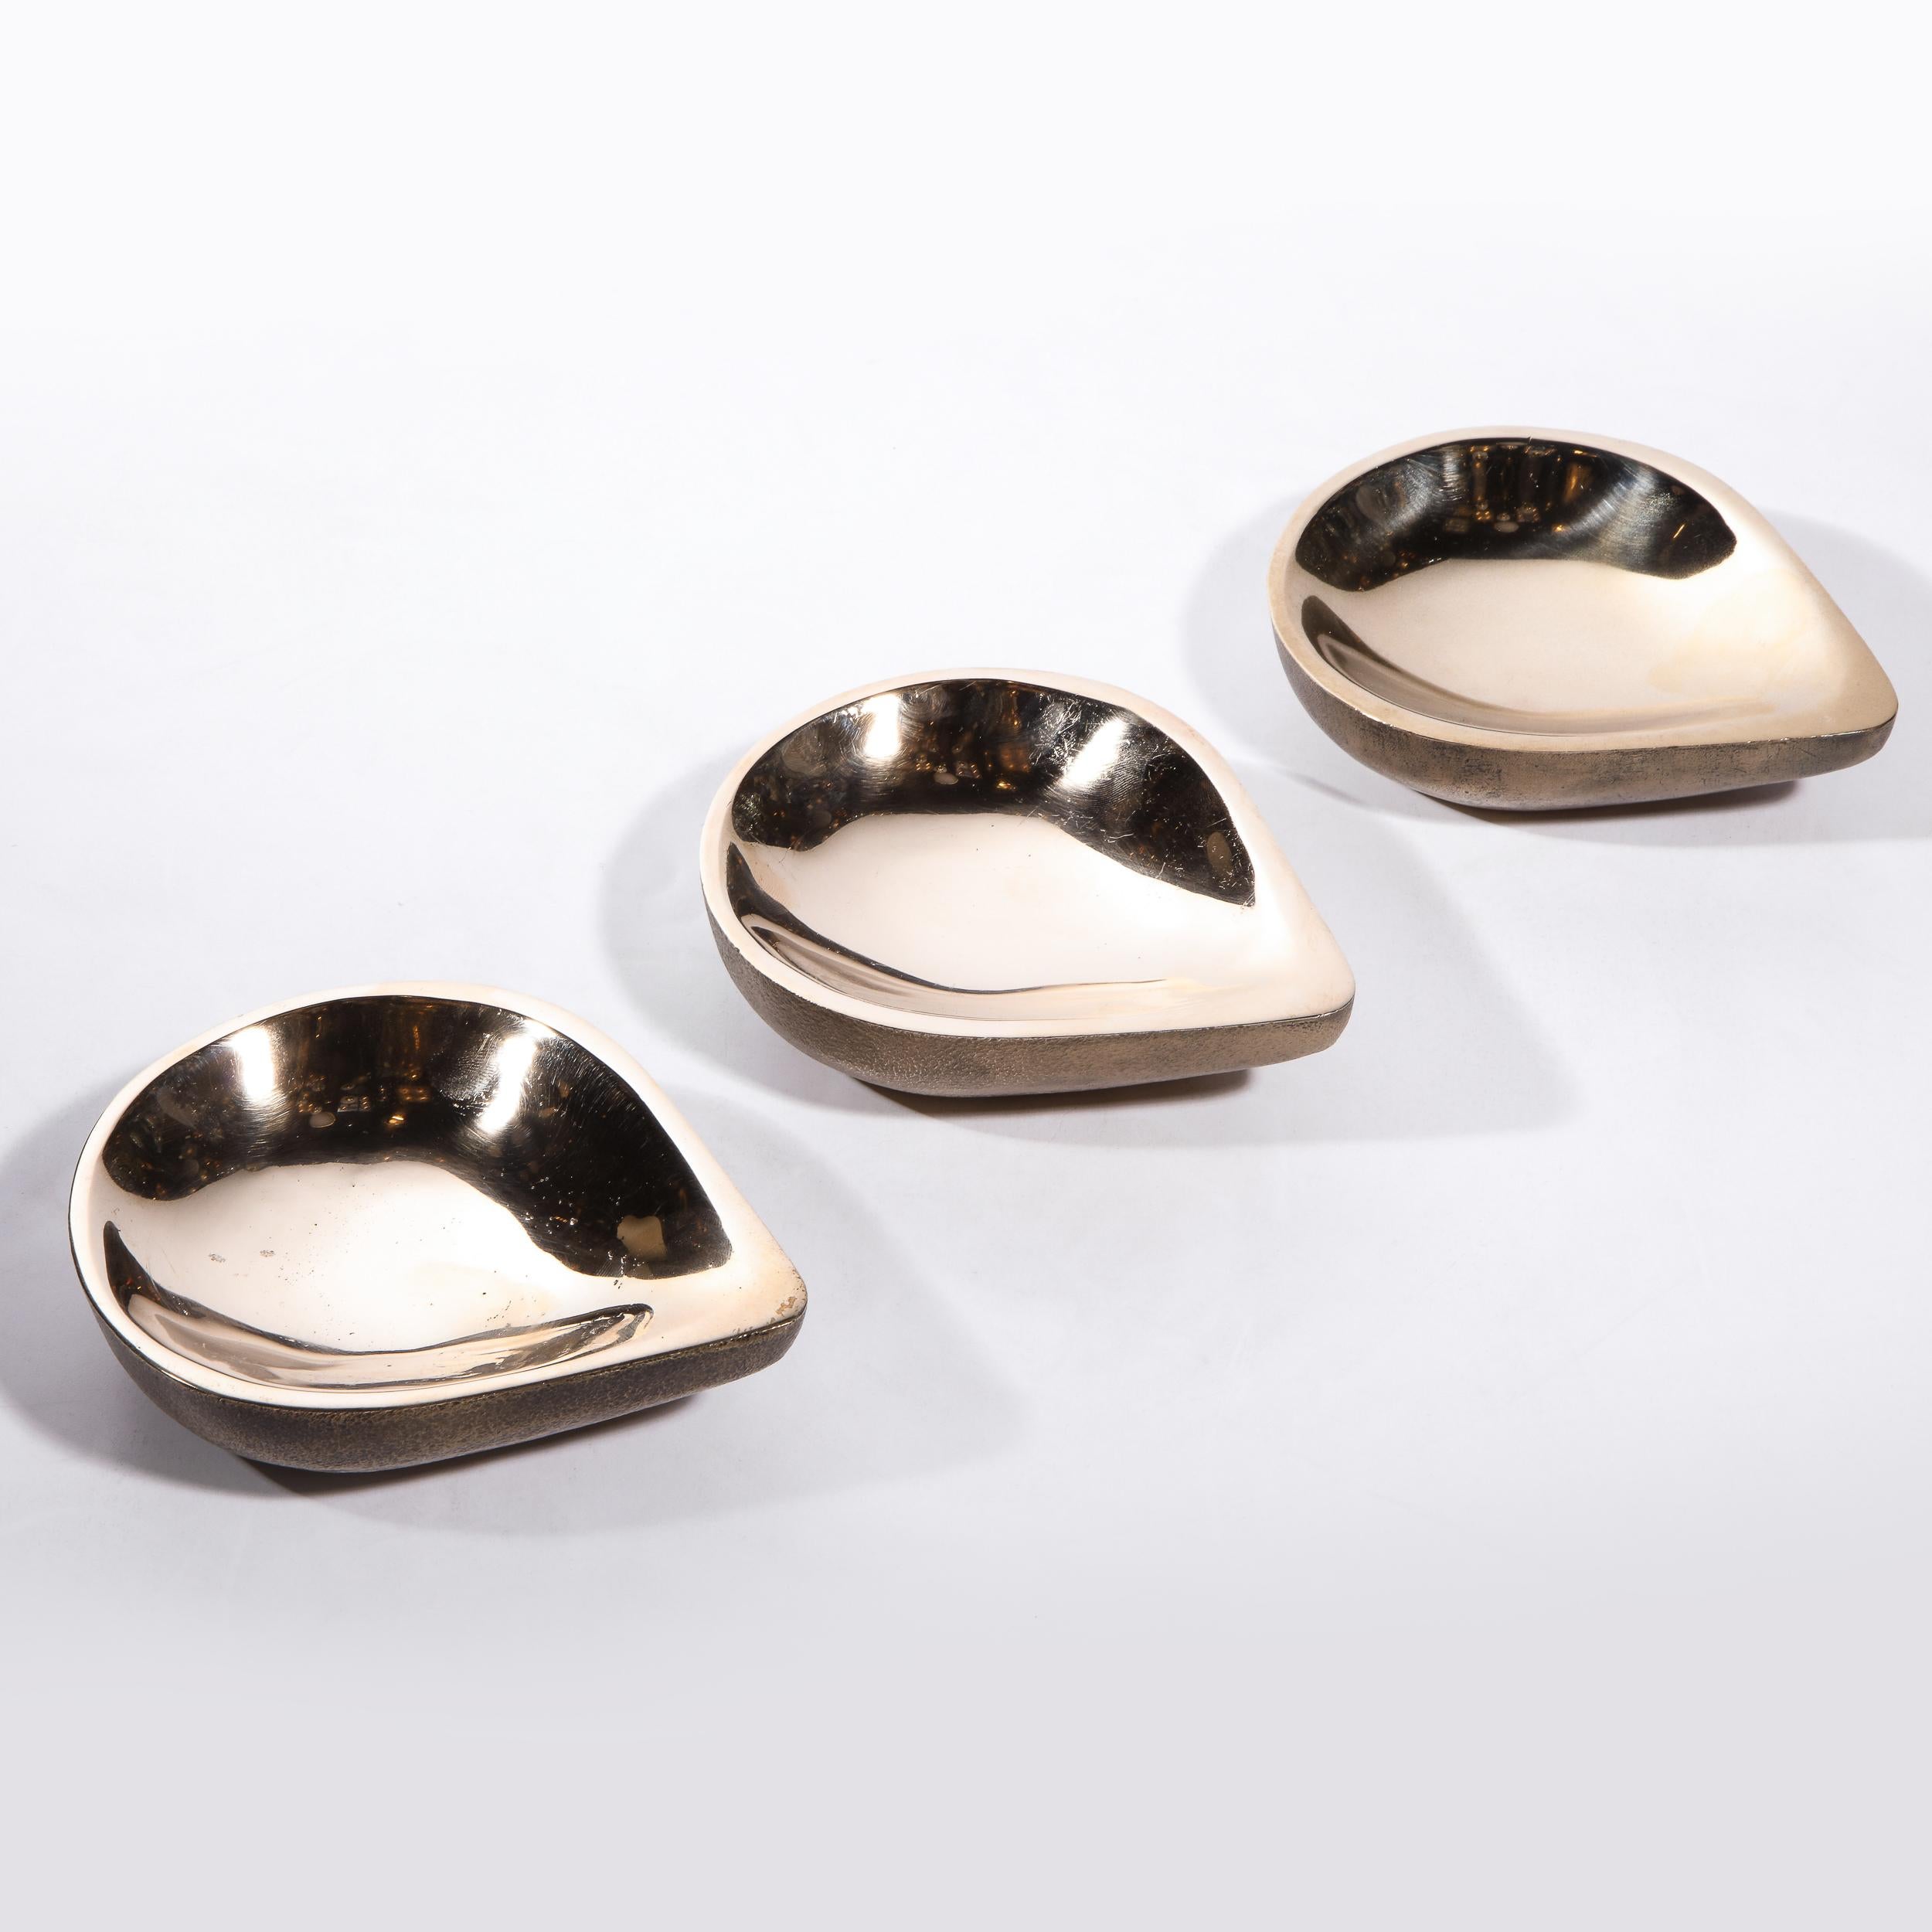 This stunning set of three modernist bronze teardrop form decorative bowls by the esteemed artist Steven Haulenbeek. They offer austere tear drop silhouettes with matte exteriors and lustrous polished interiors. This object represents one of the few